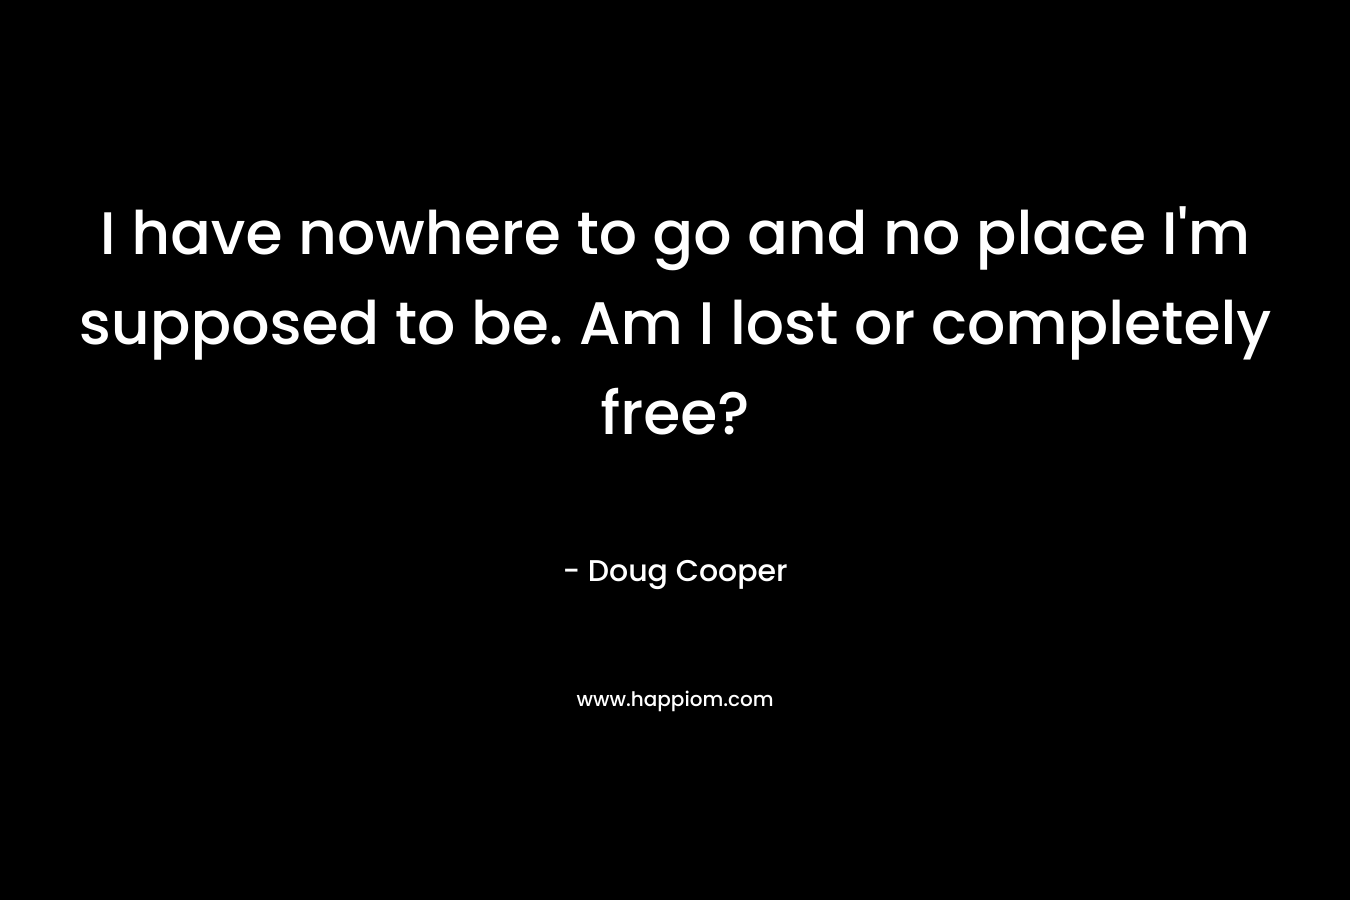 I have nowhere to go and no place I'm supposed to be. Am I lost or completely free?